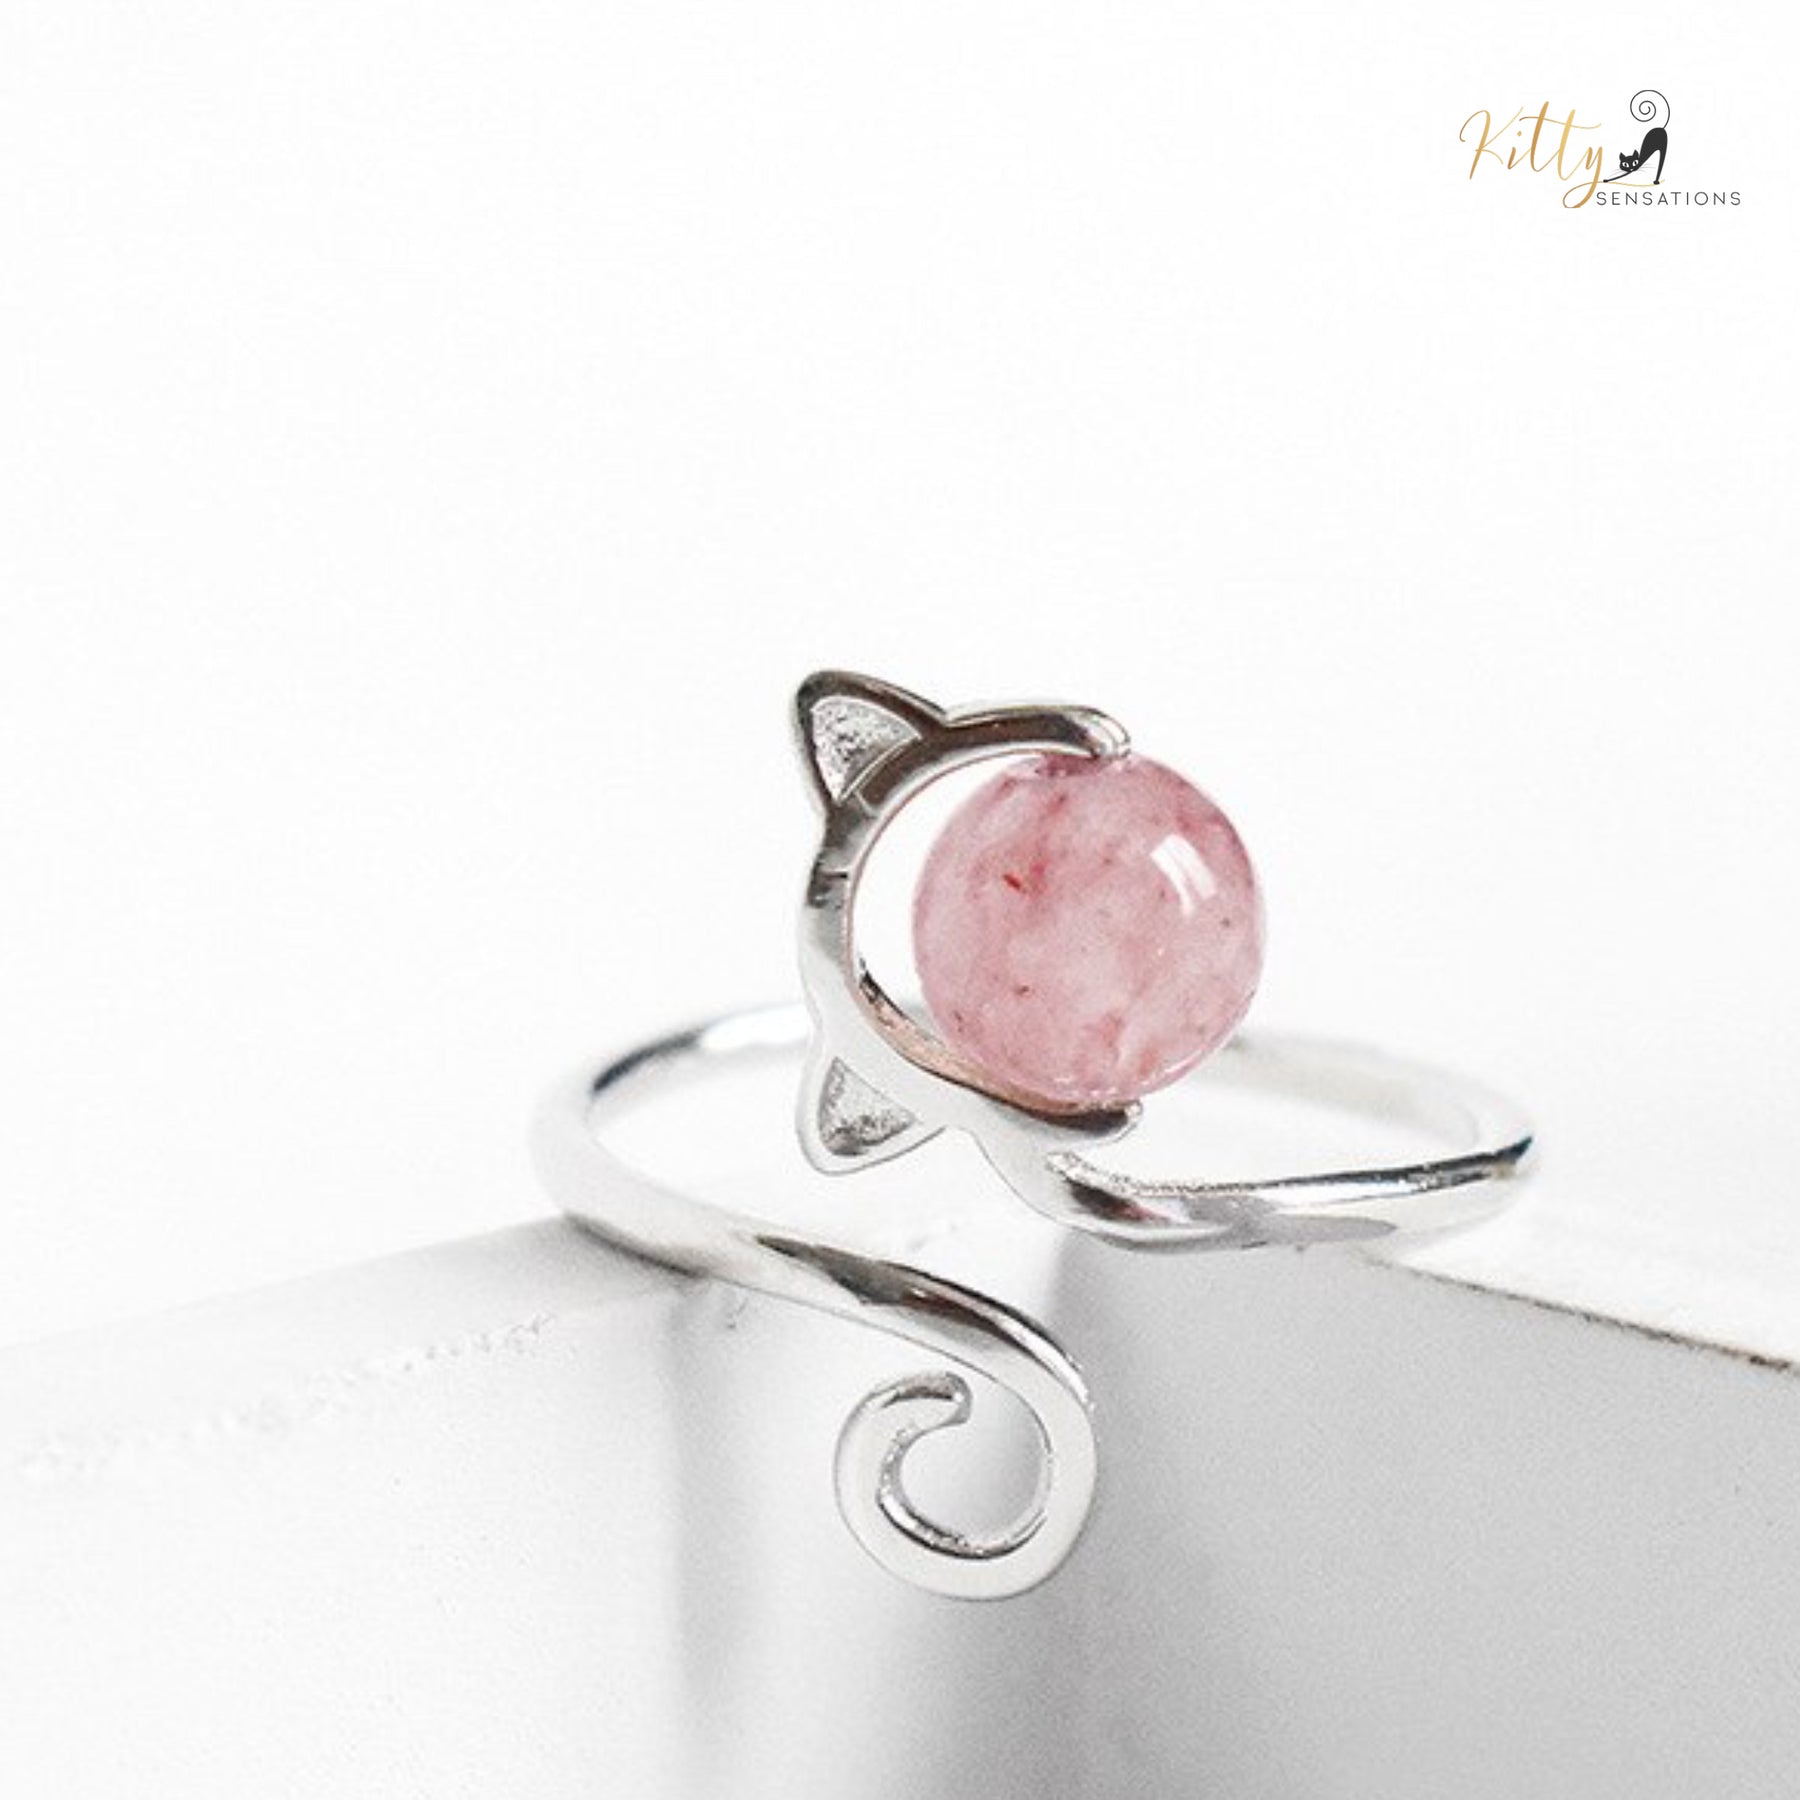 Crystal Face Cat Ring in Solid 925 Sterling Silver - Adjustable  Size ($46.31): https://www.kittysensations.com/products/crystal-face-cat-ring?_pos=1&_sid=b671f3198&_ss=r